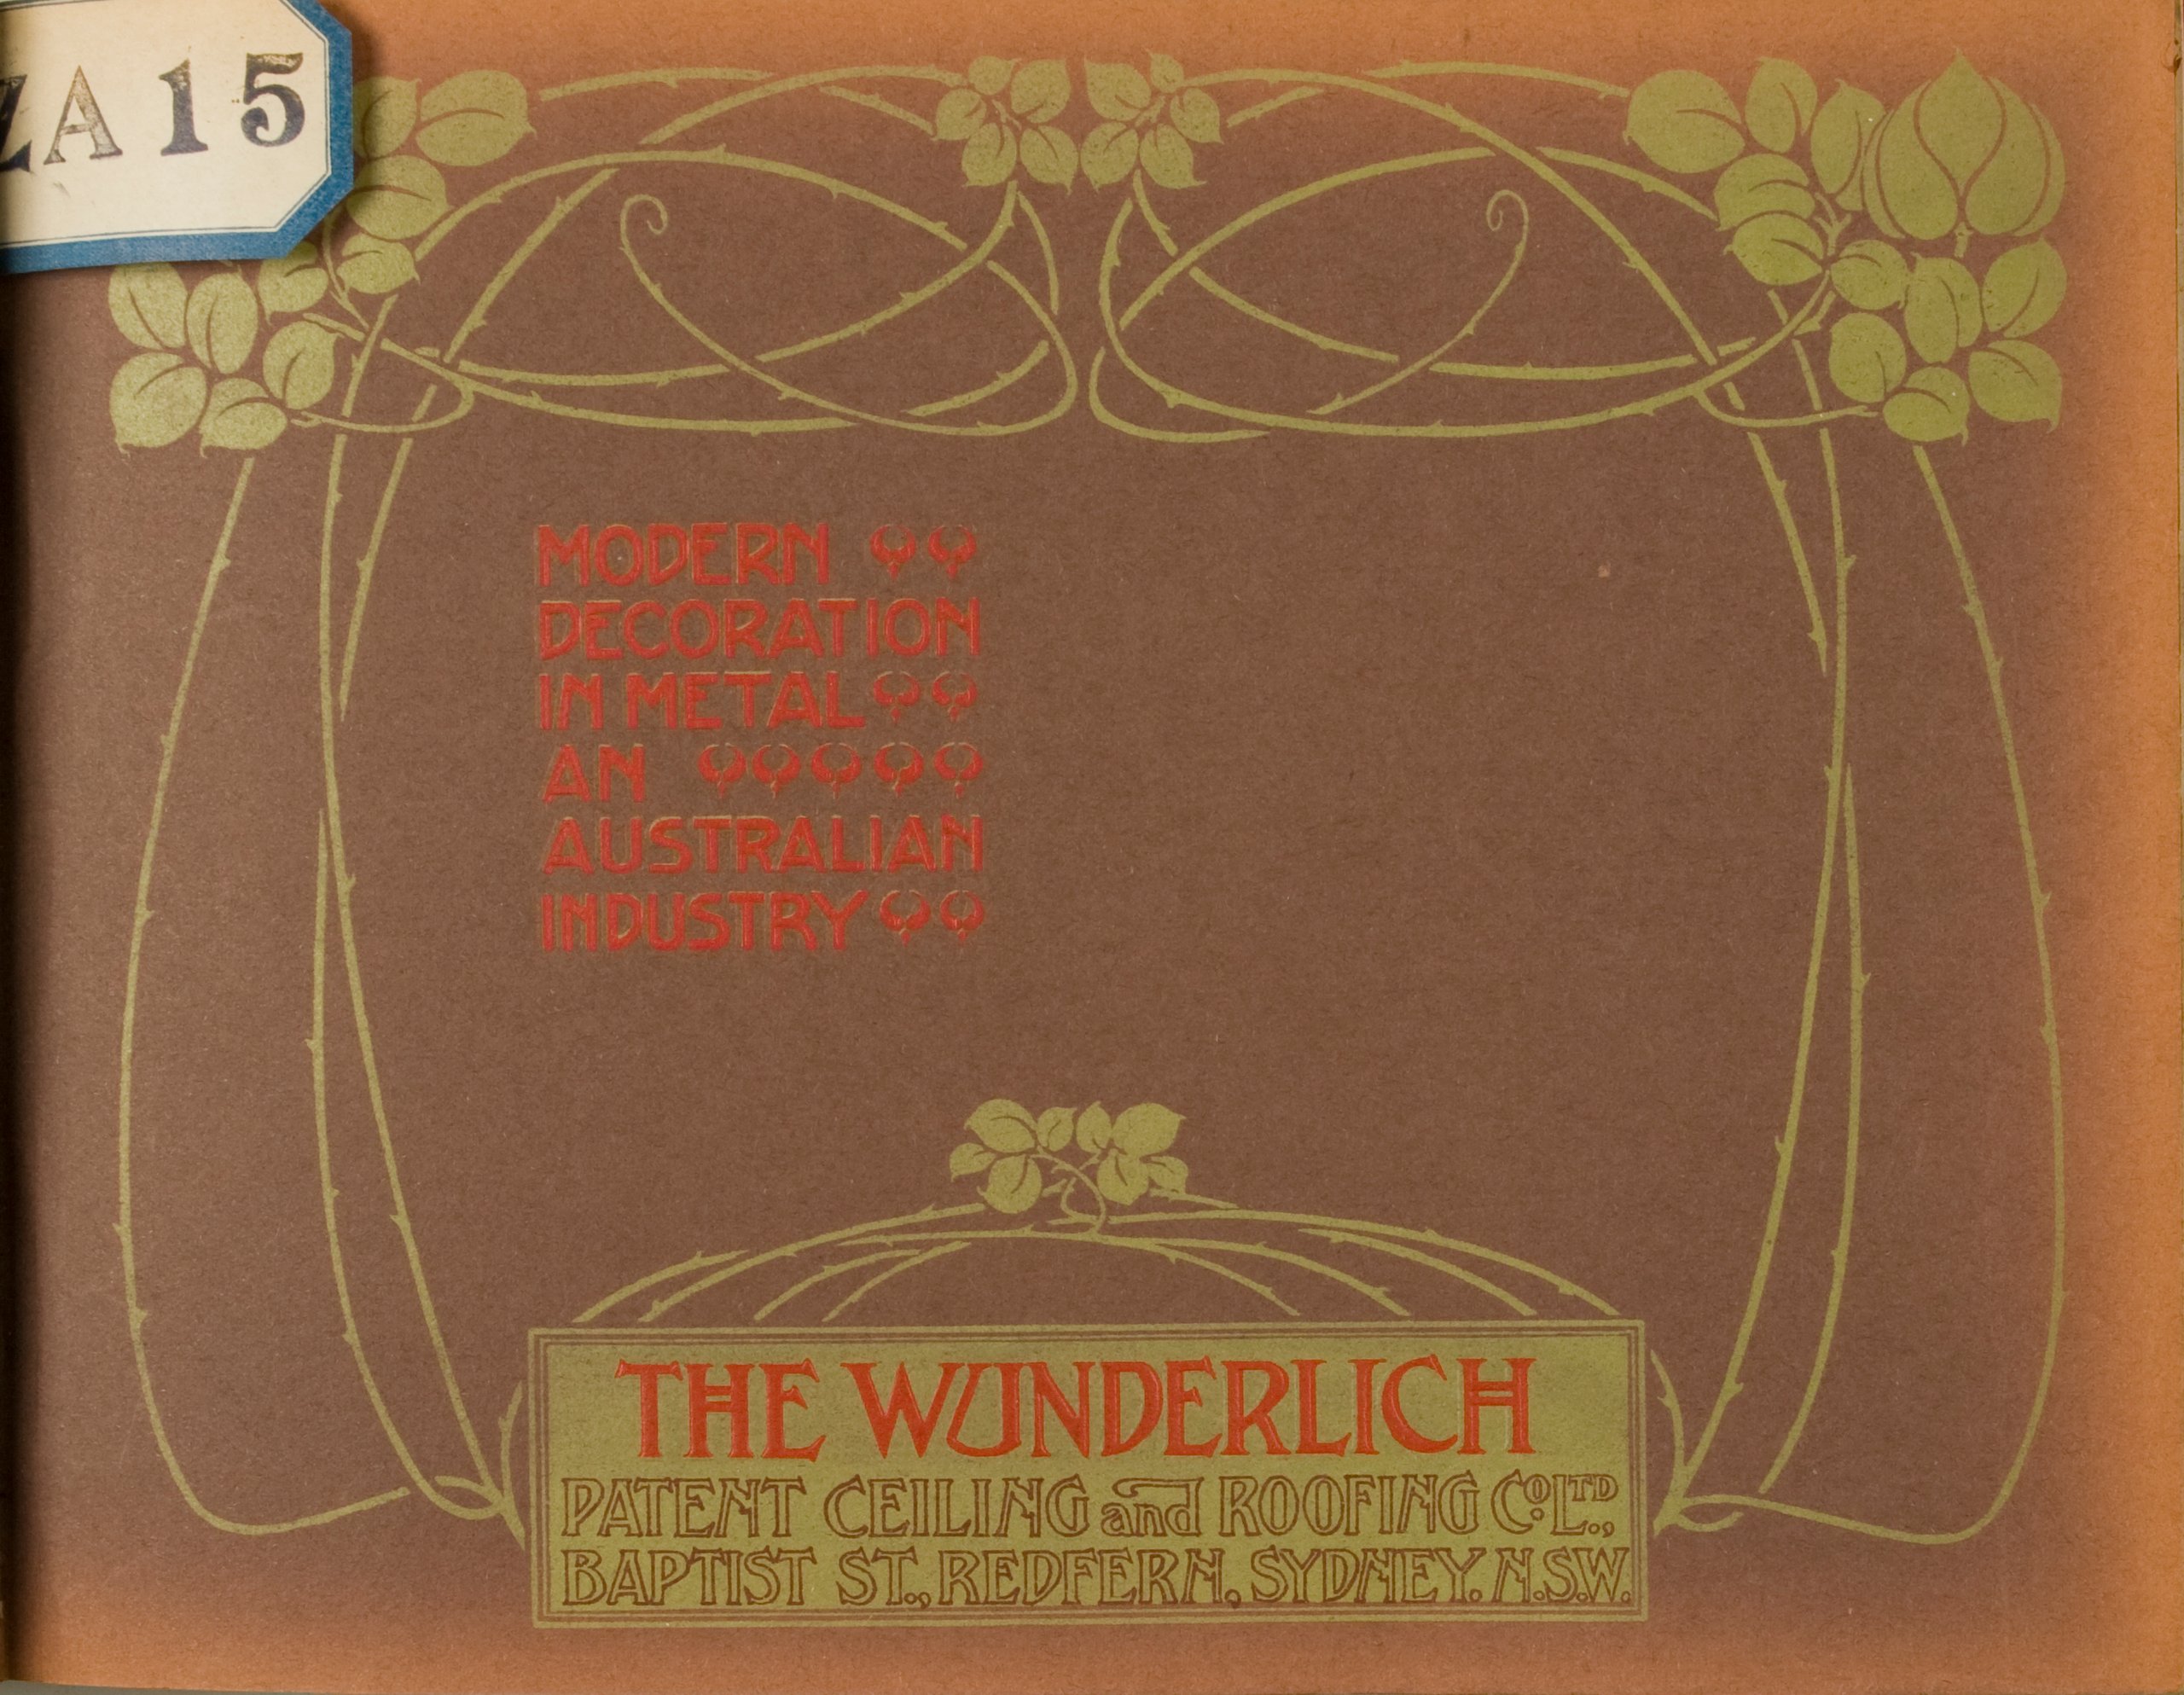 Front cover from Wunderlich supplement catalogue